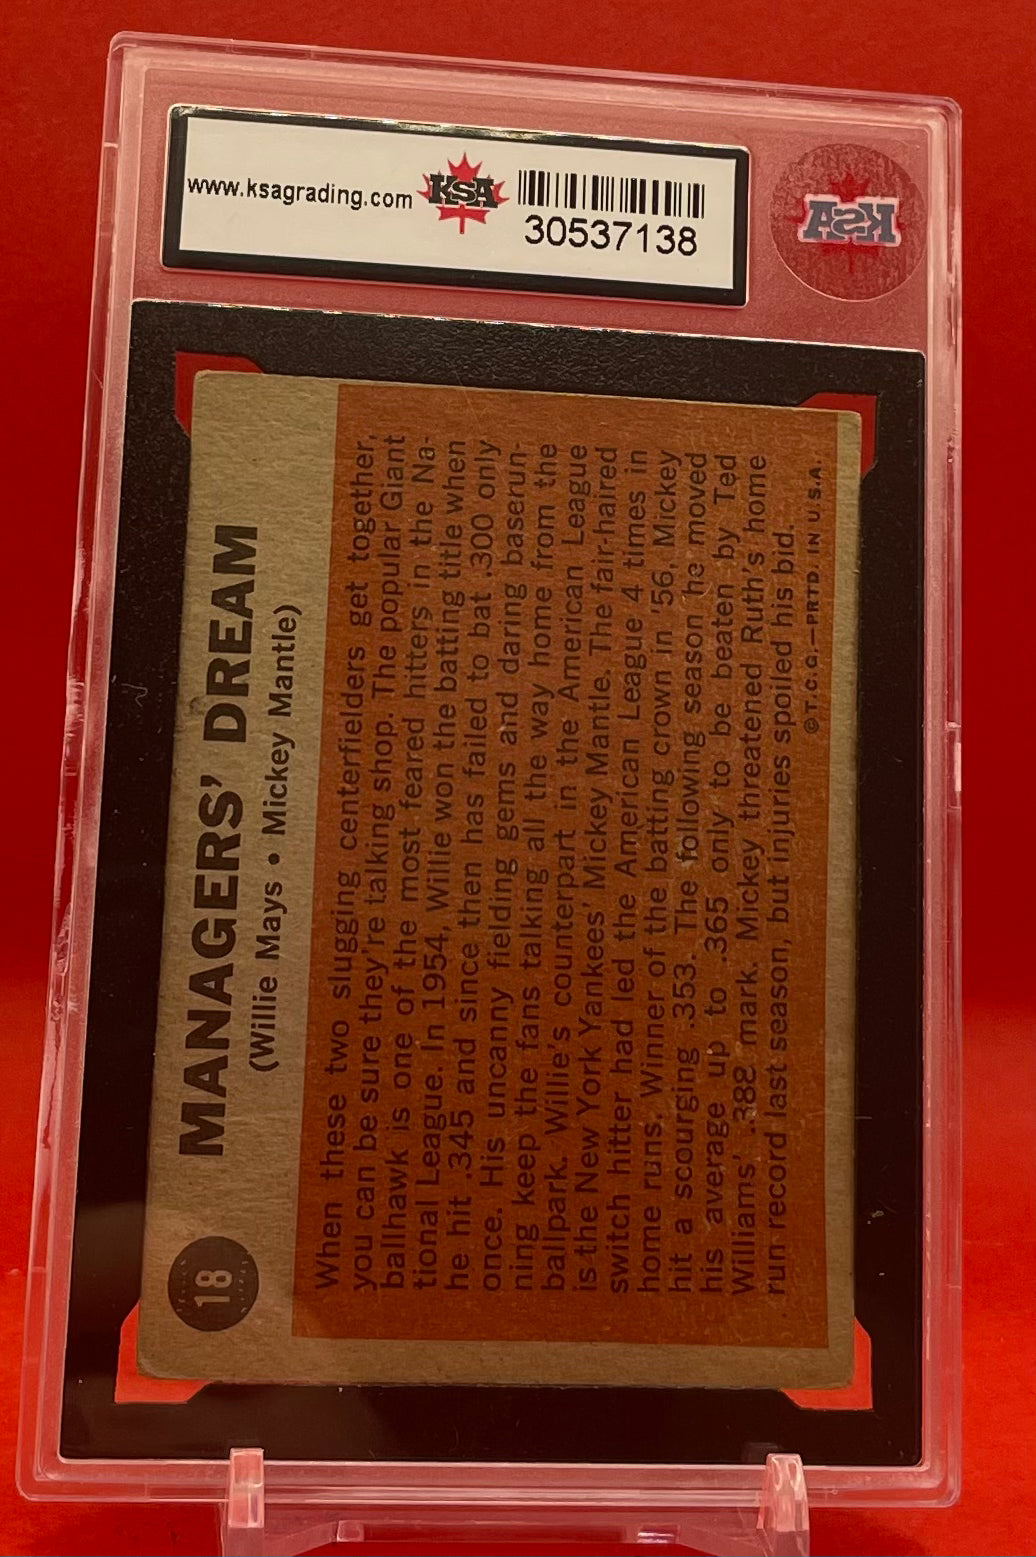 1962 TOPPS MANAGERS’ DREAM MANTLE/MAYS -KSA 4 VGE